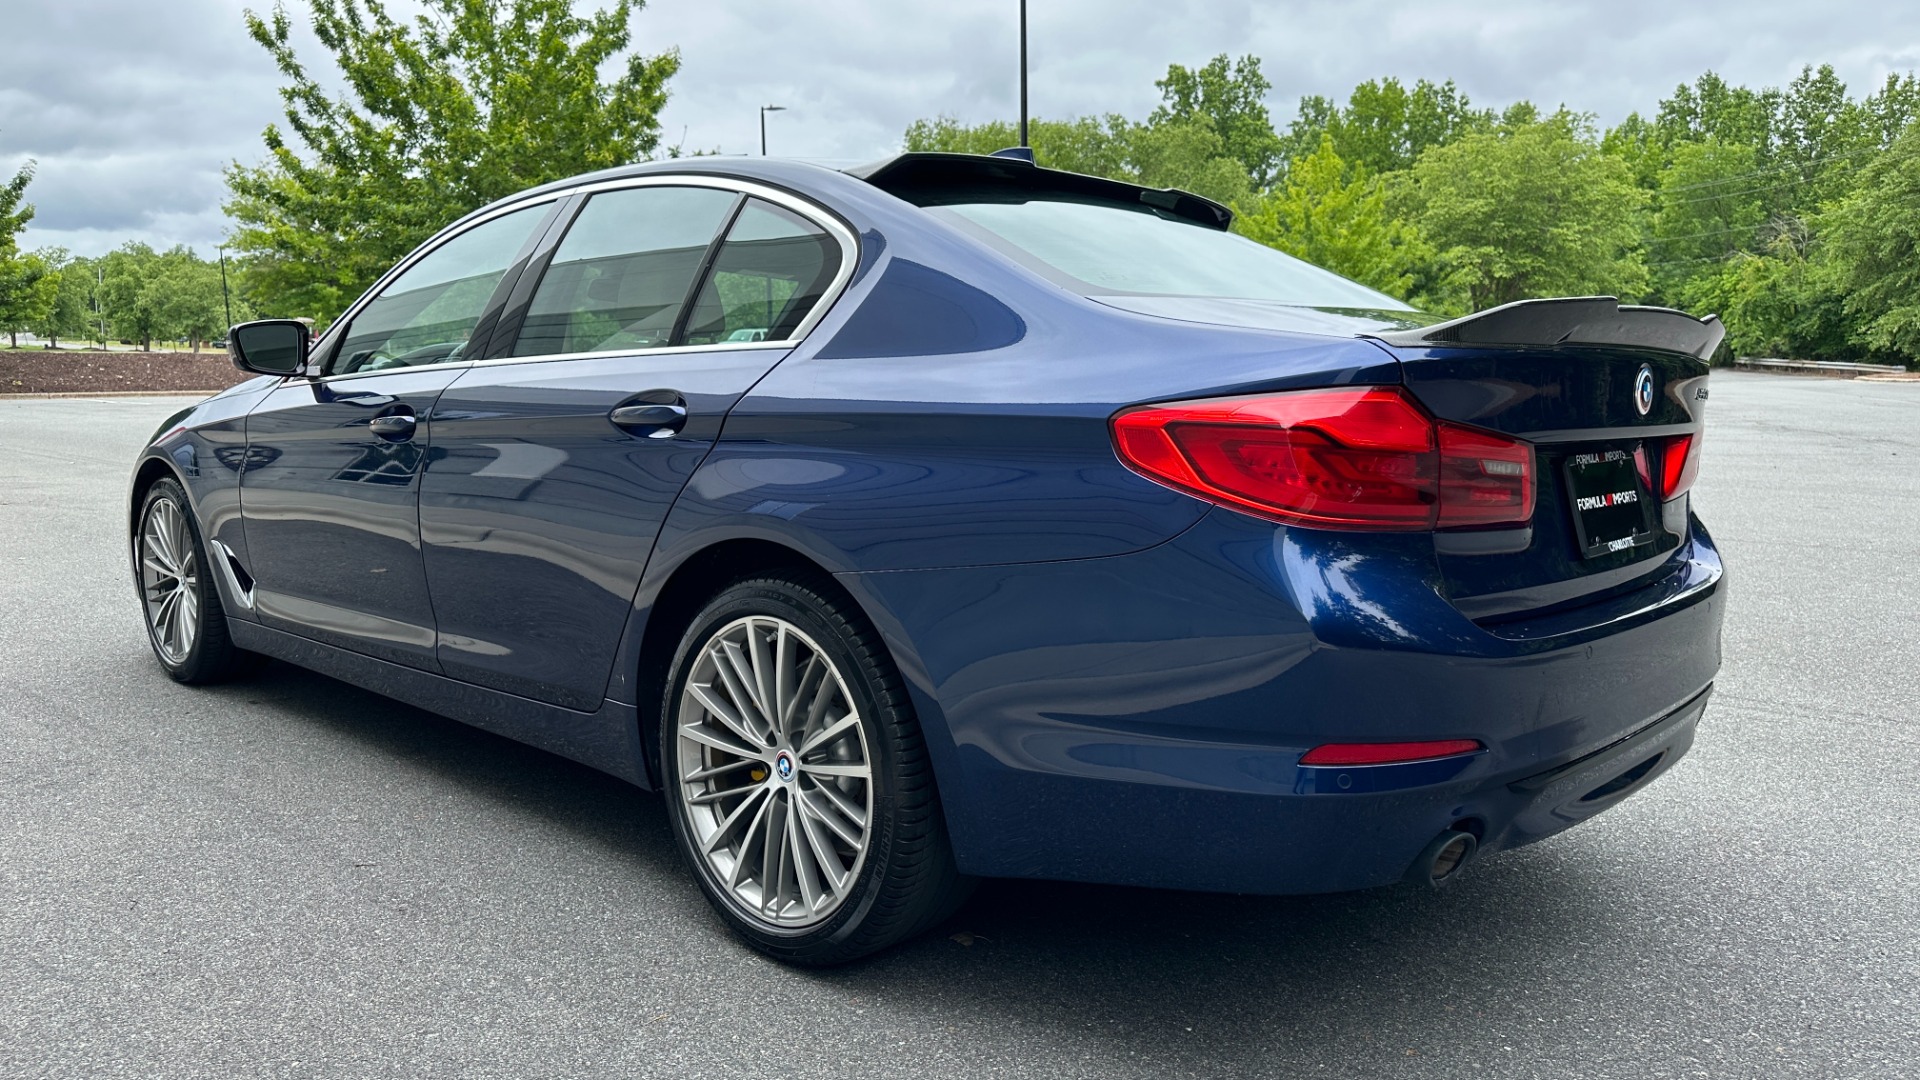 Used 2019 BMW 5 Series 530i / LIGHTING PACKAGE / CONVENIENCE PACKAGE / 19IN WHEELS for sale Sold at Formula Imports in Charlotte NC 28227 8